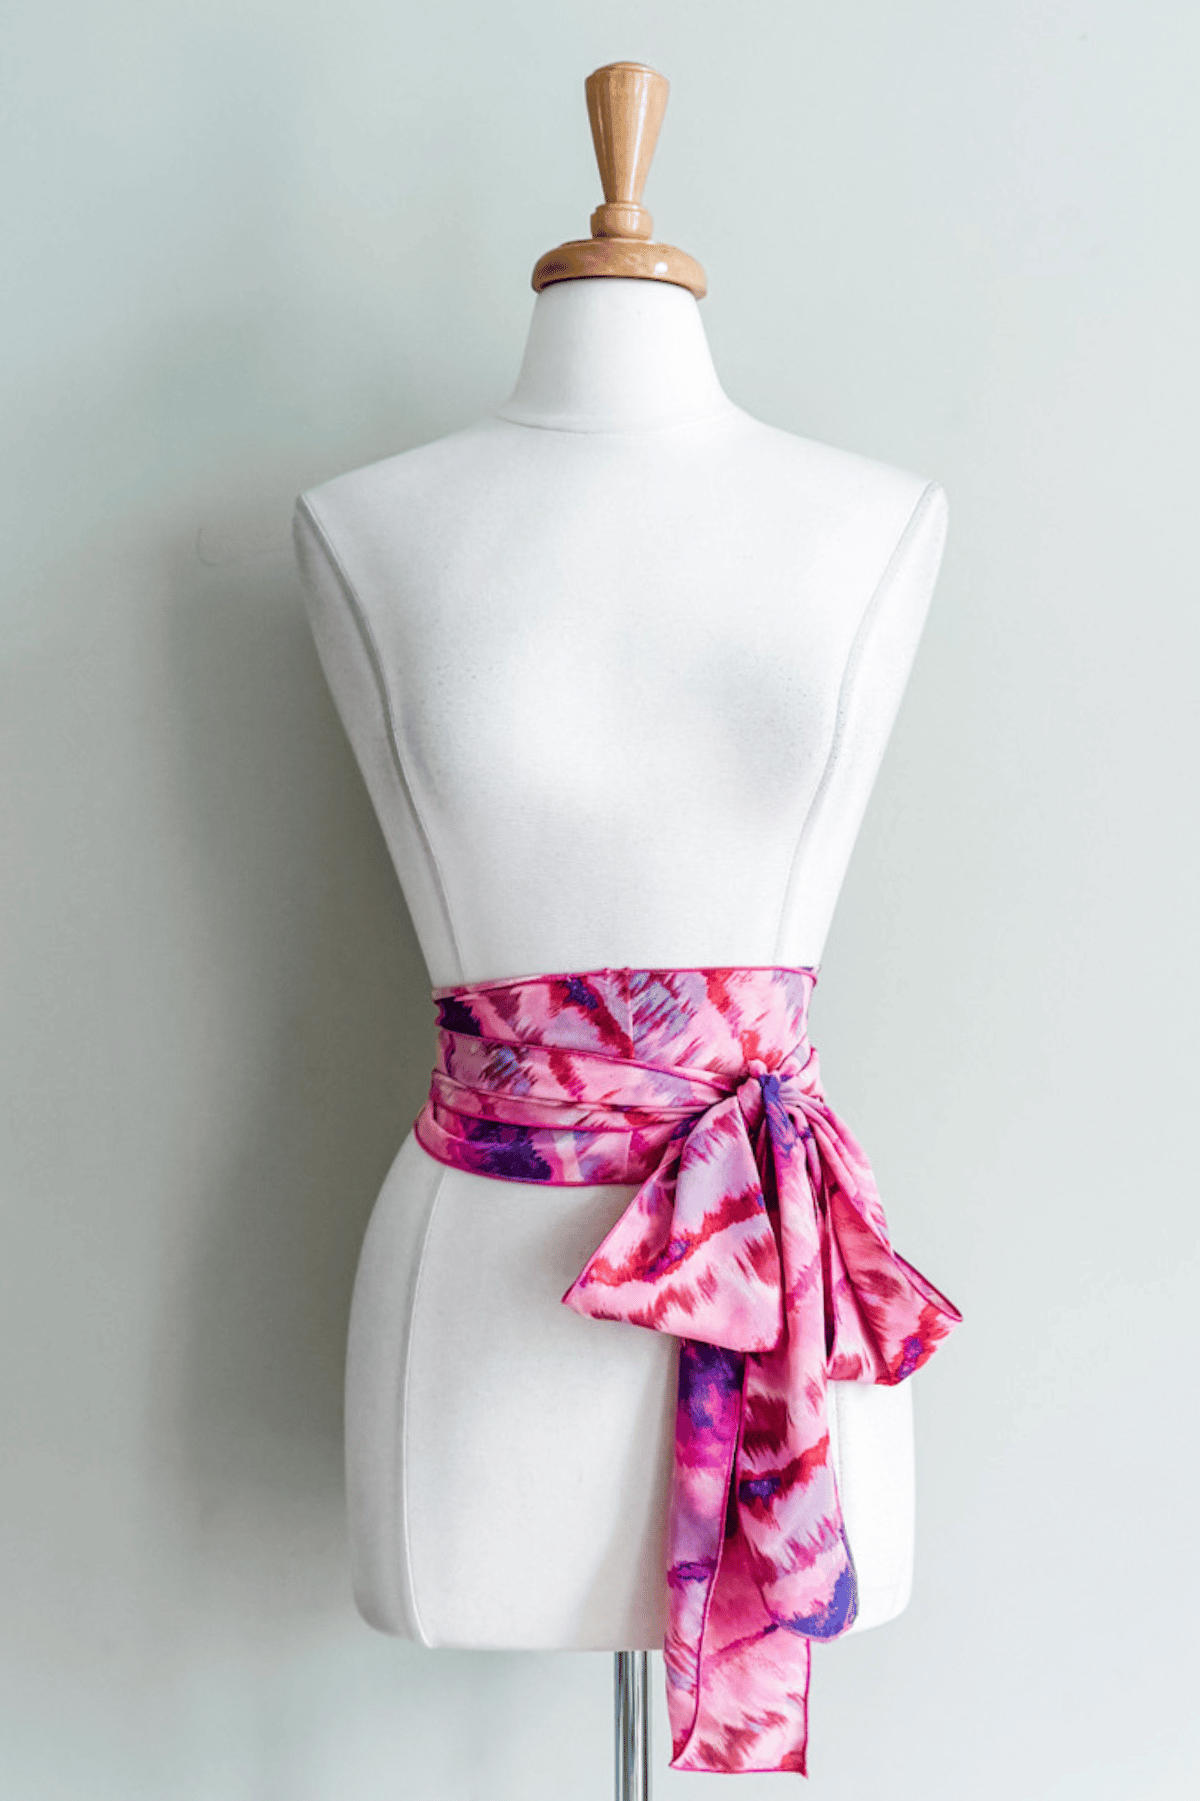 Matching Sash in Candy Floss print